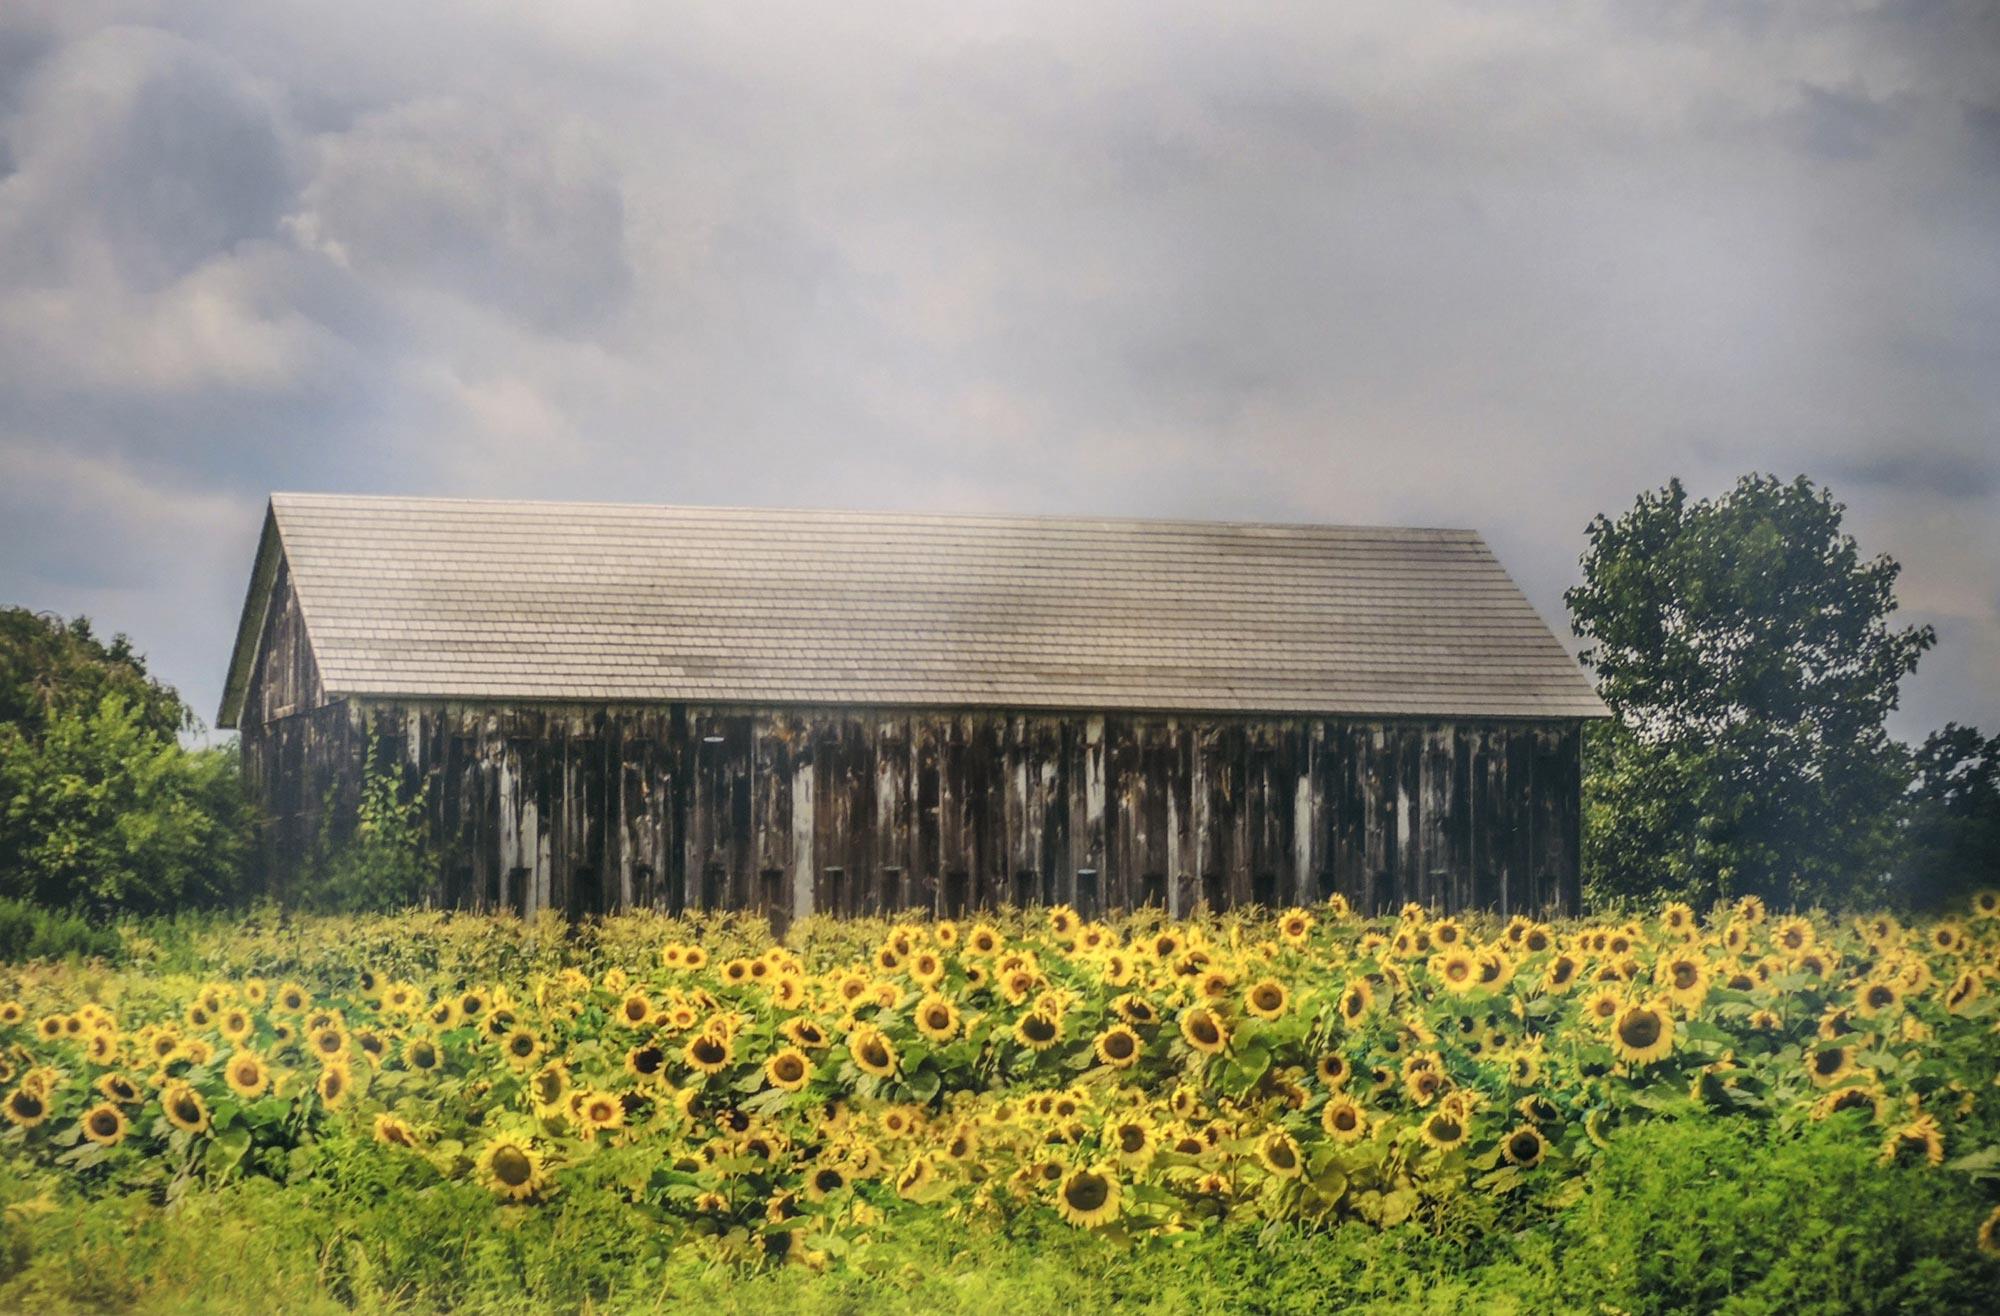 A photograph by Gabrielle Robinson of a wooden building in a field of sunflowers